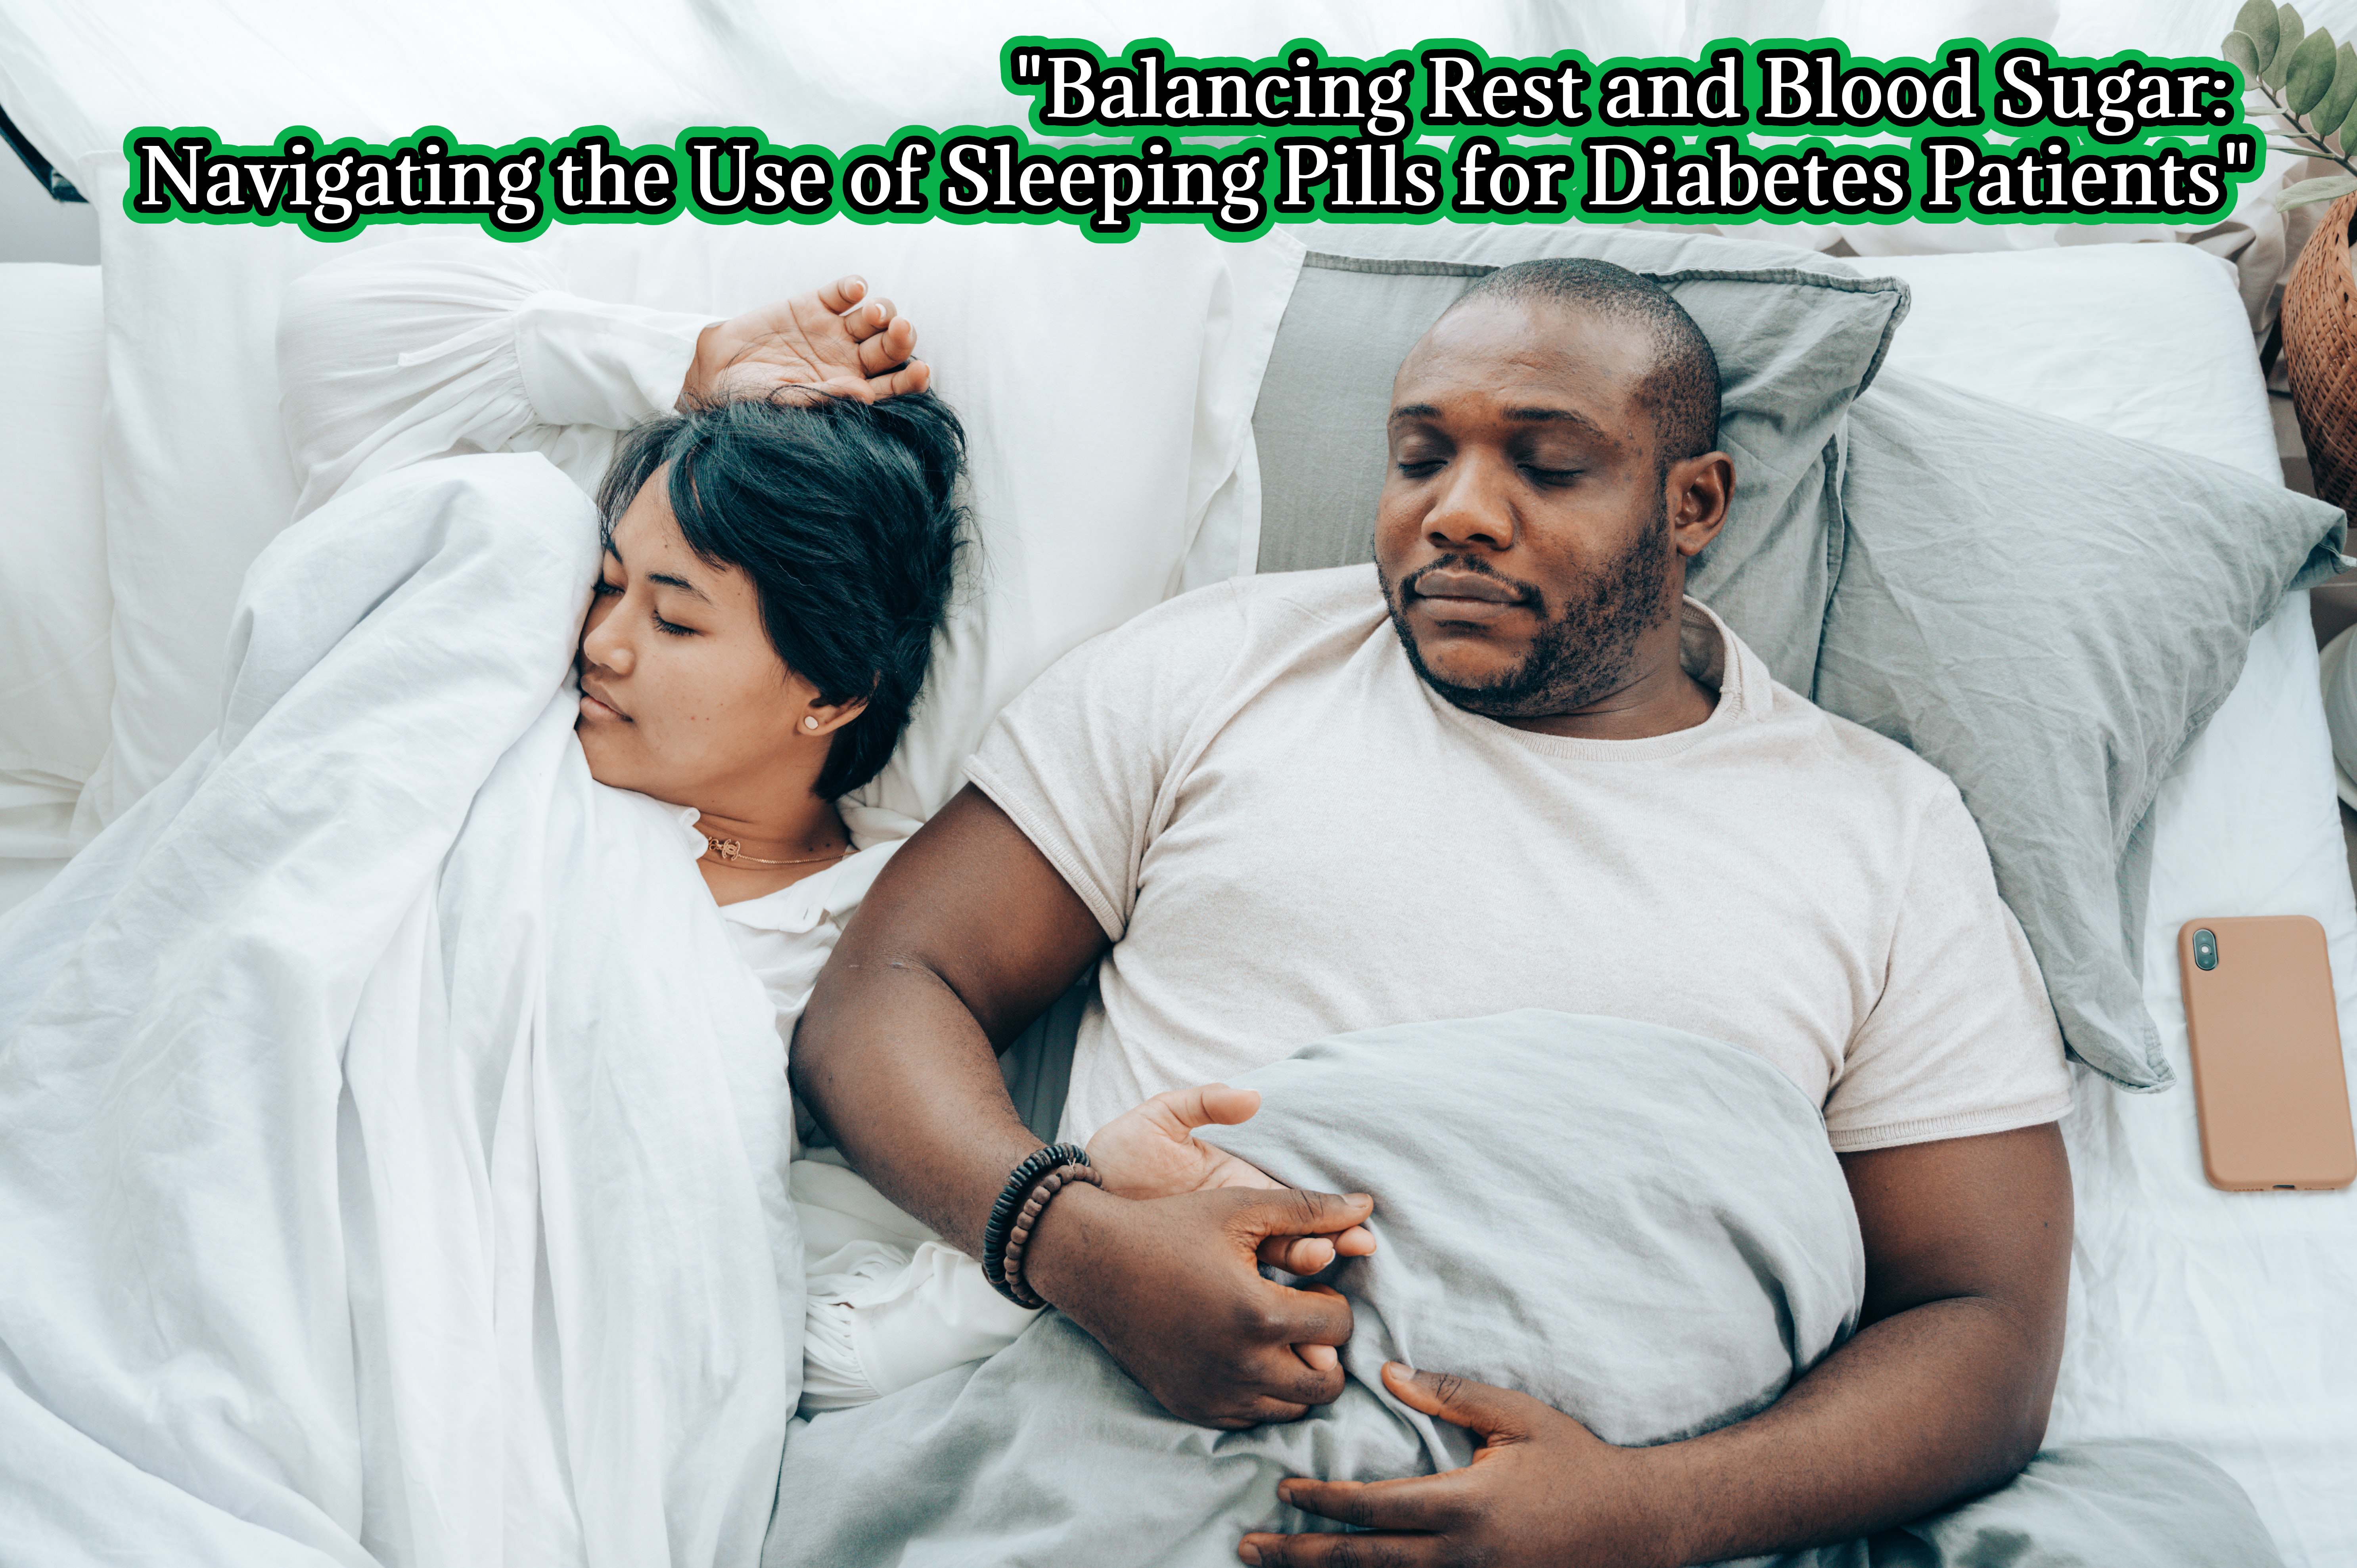 Balancing Rest and Blood Sugar: Navigating the Use of Sleeping Pills for Diabetes Patients